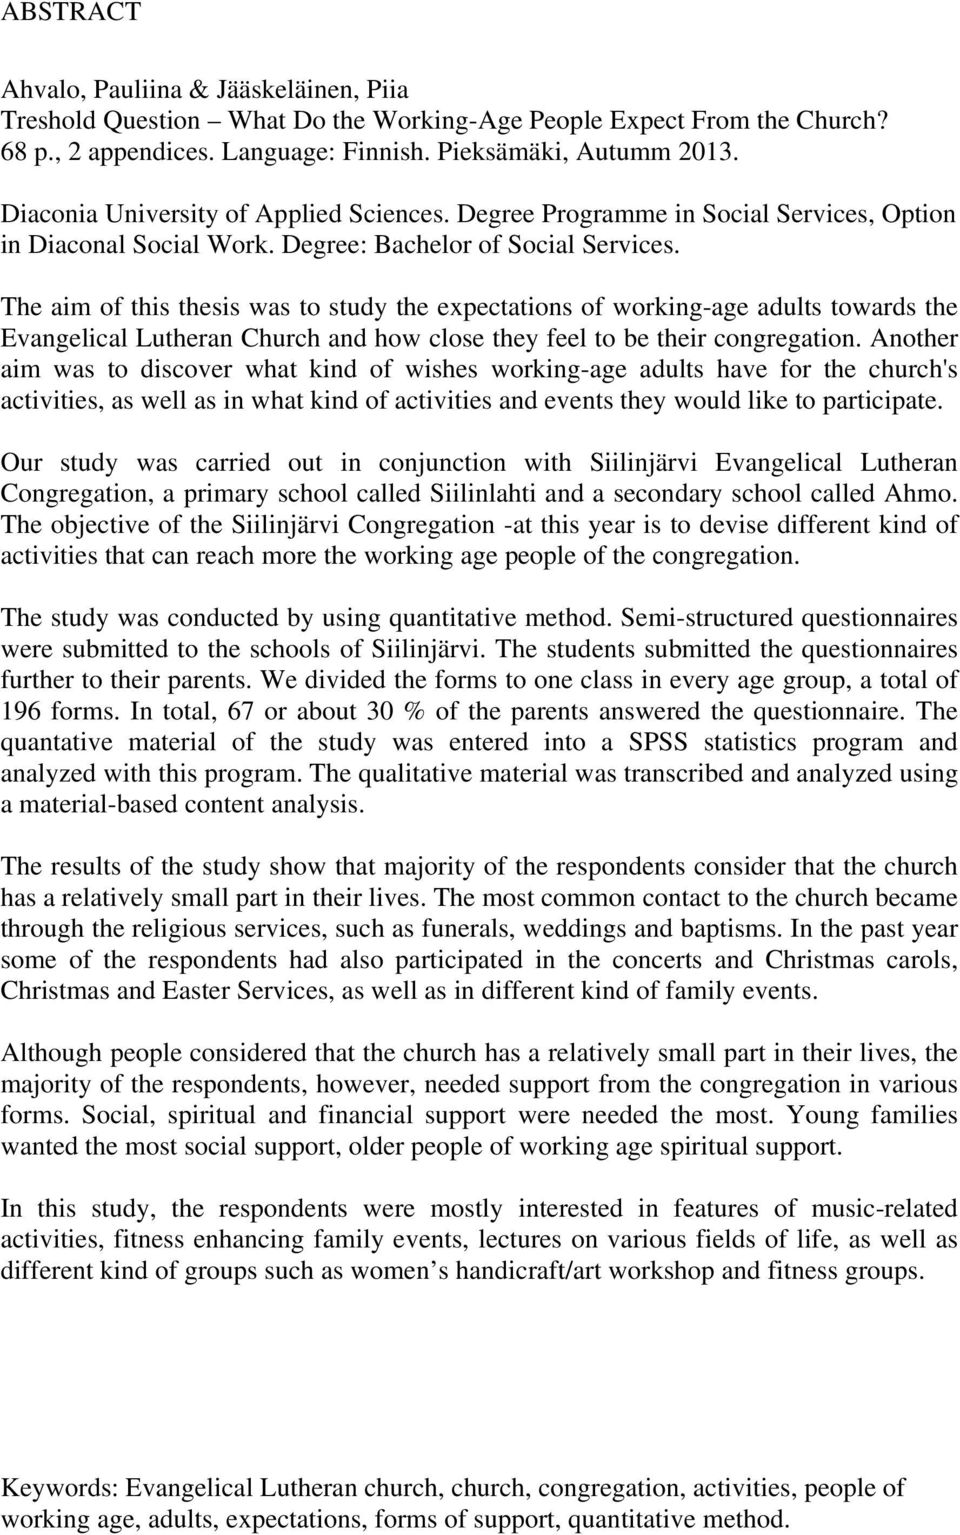 The aim of this thesis was to study the expectations of working-age adults towards the Evangelical Lutheran Church and how close they feel to be their congregation.